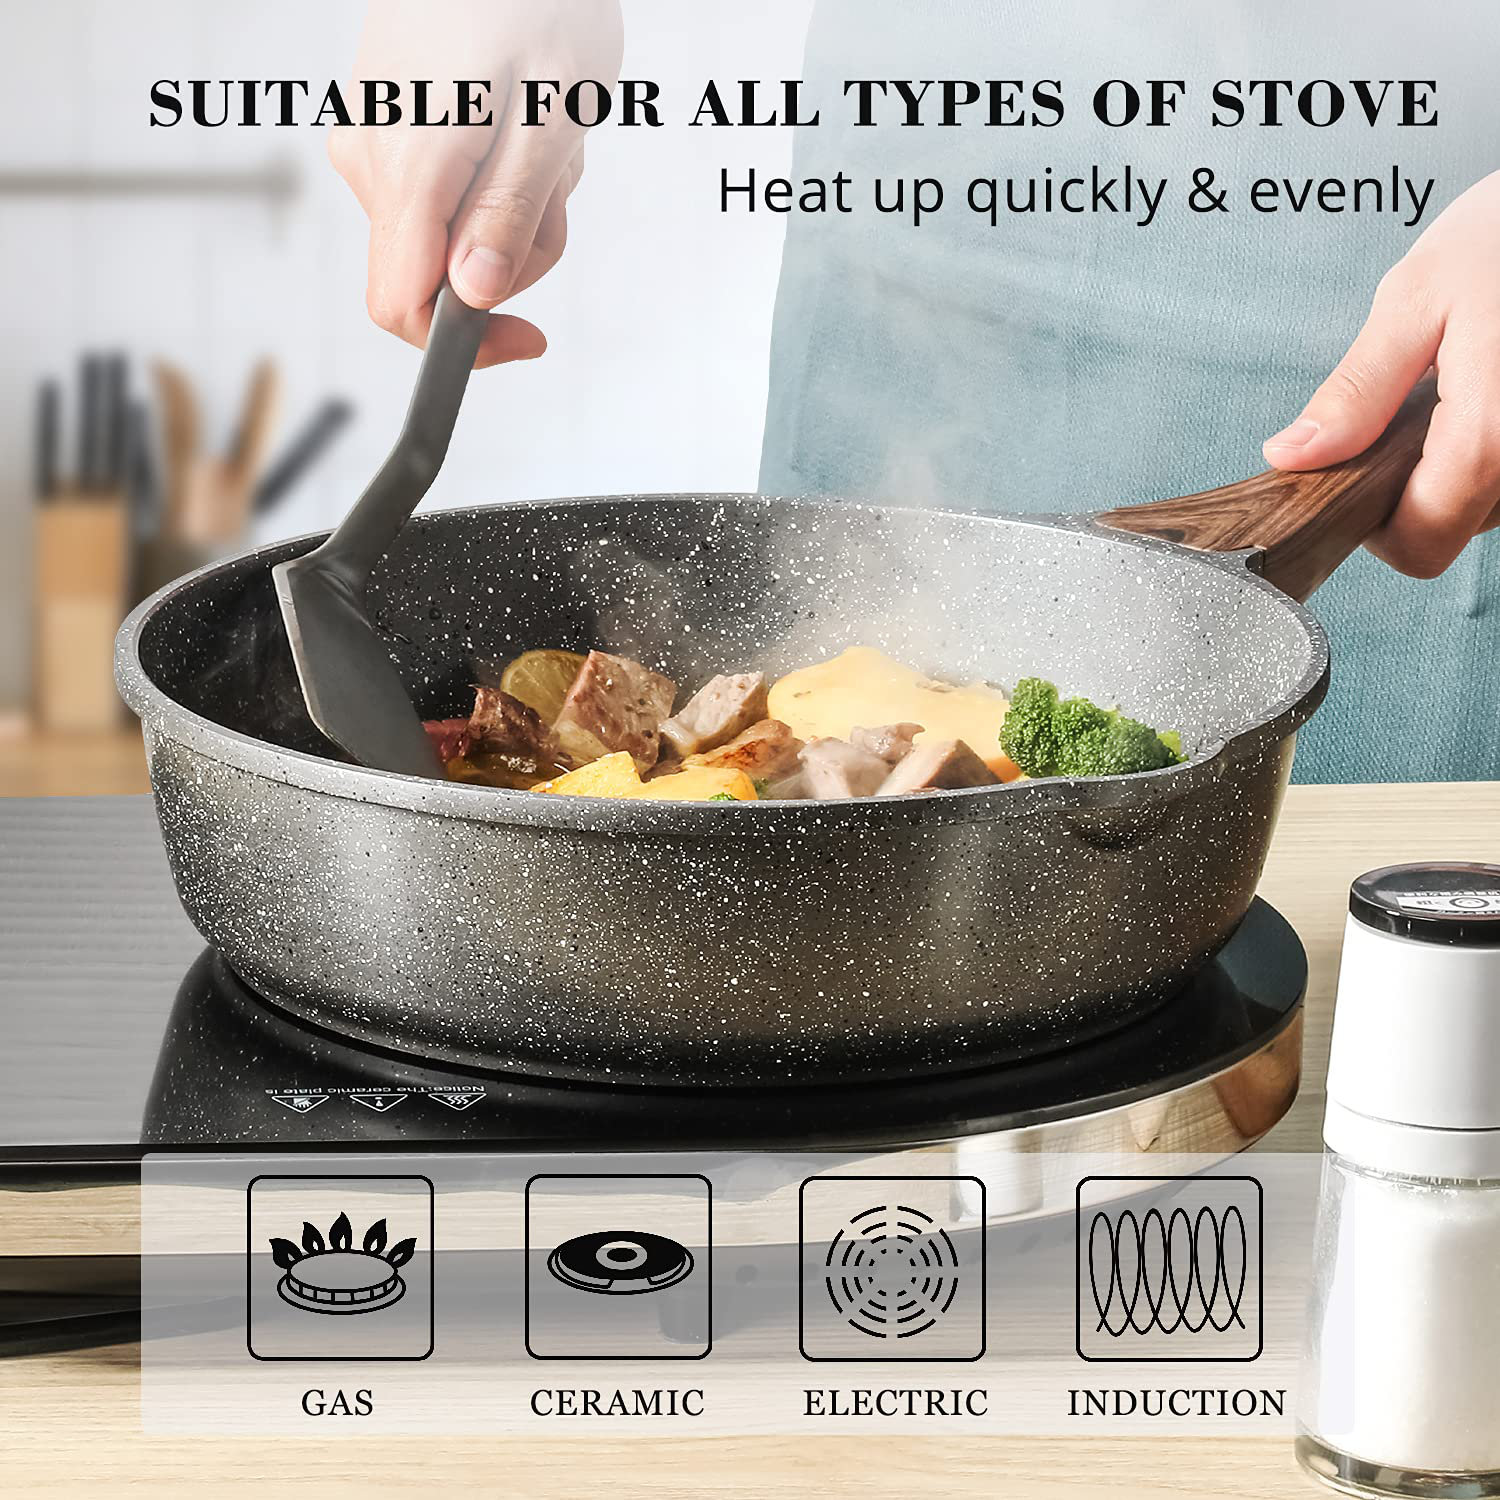  Cyrret Stone Frying Pan 8 inch, Nonstick Small Omelet Pan with  100% APEO&PFOA-Free Stone Non Stick Coating, Granite Skillet Pan for  Cooking, Nonstick Skillet Frying Pan Suitable for All Stoves: Home